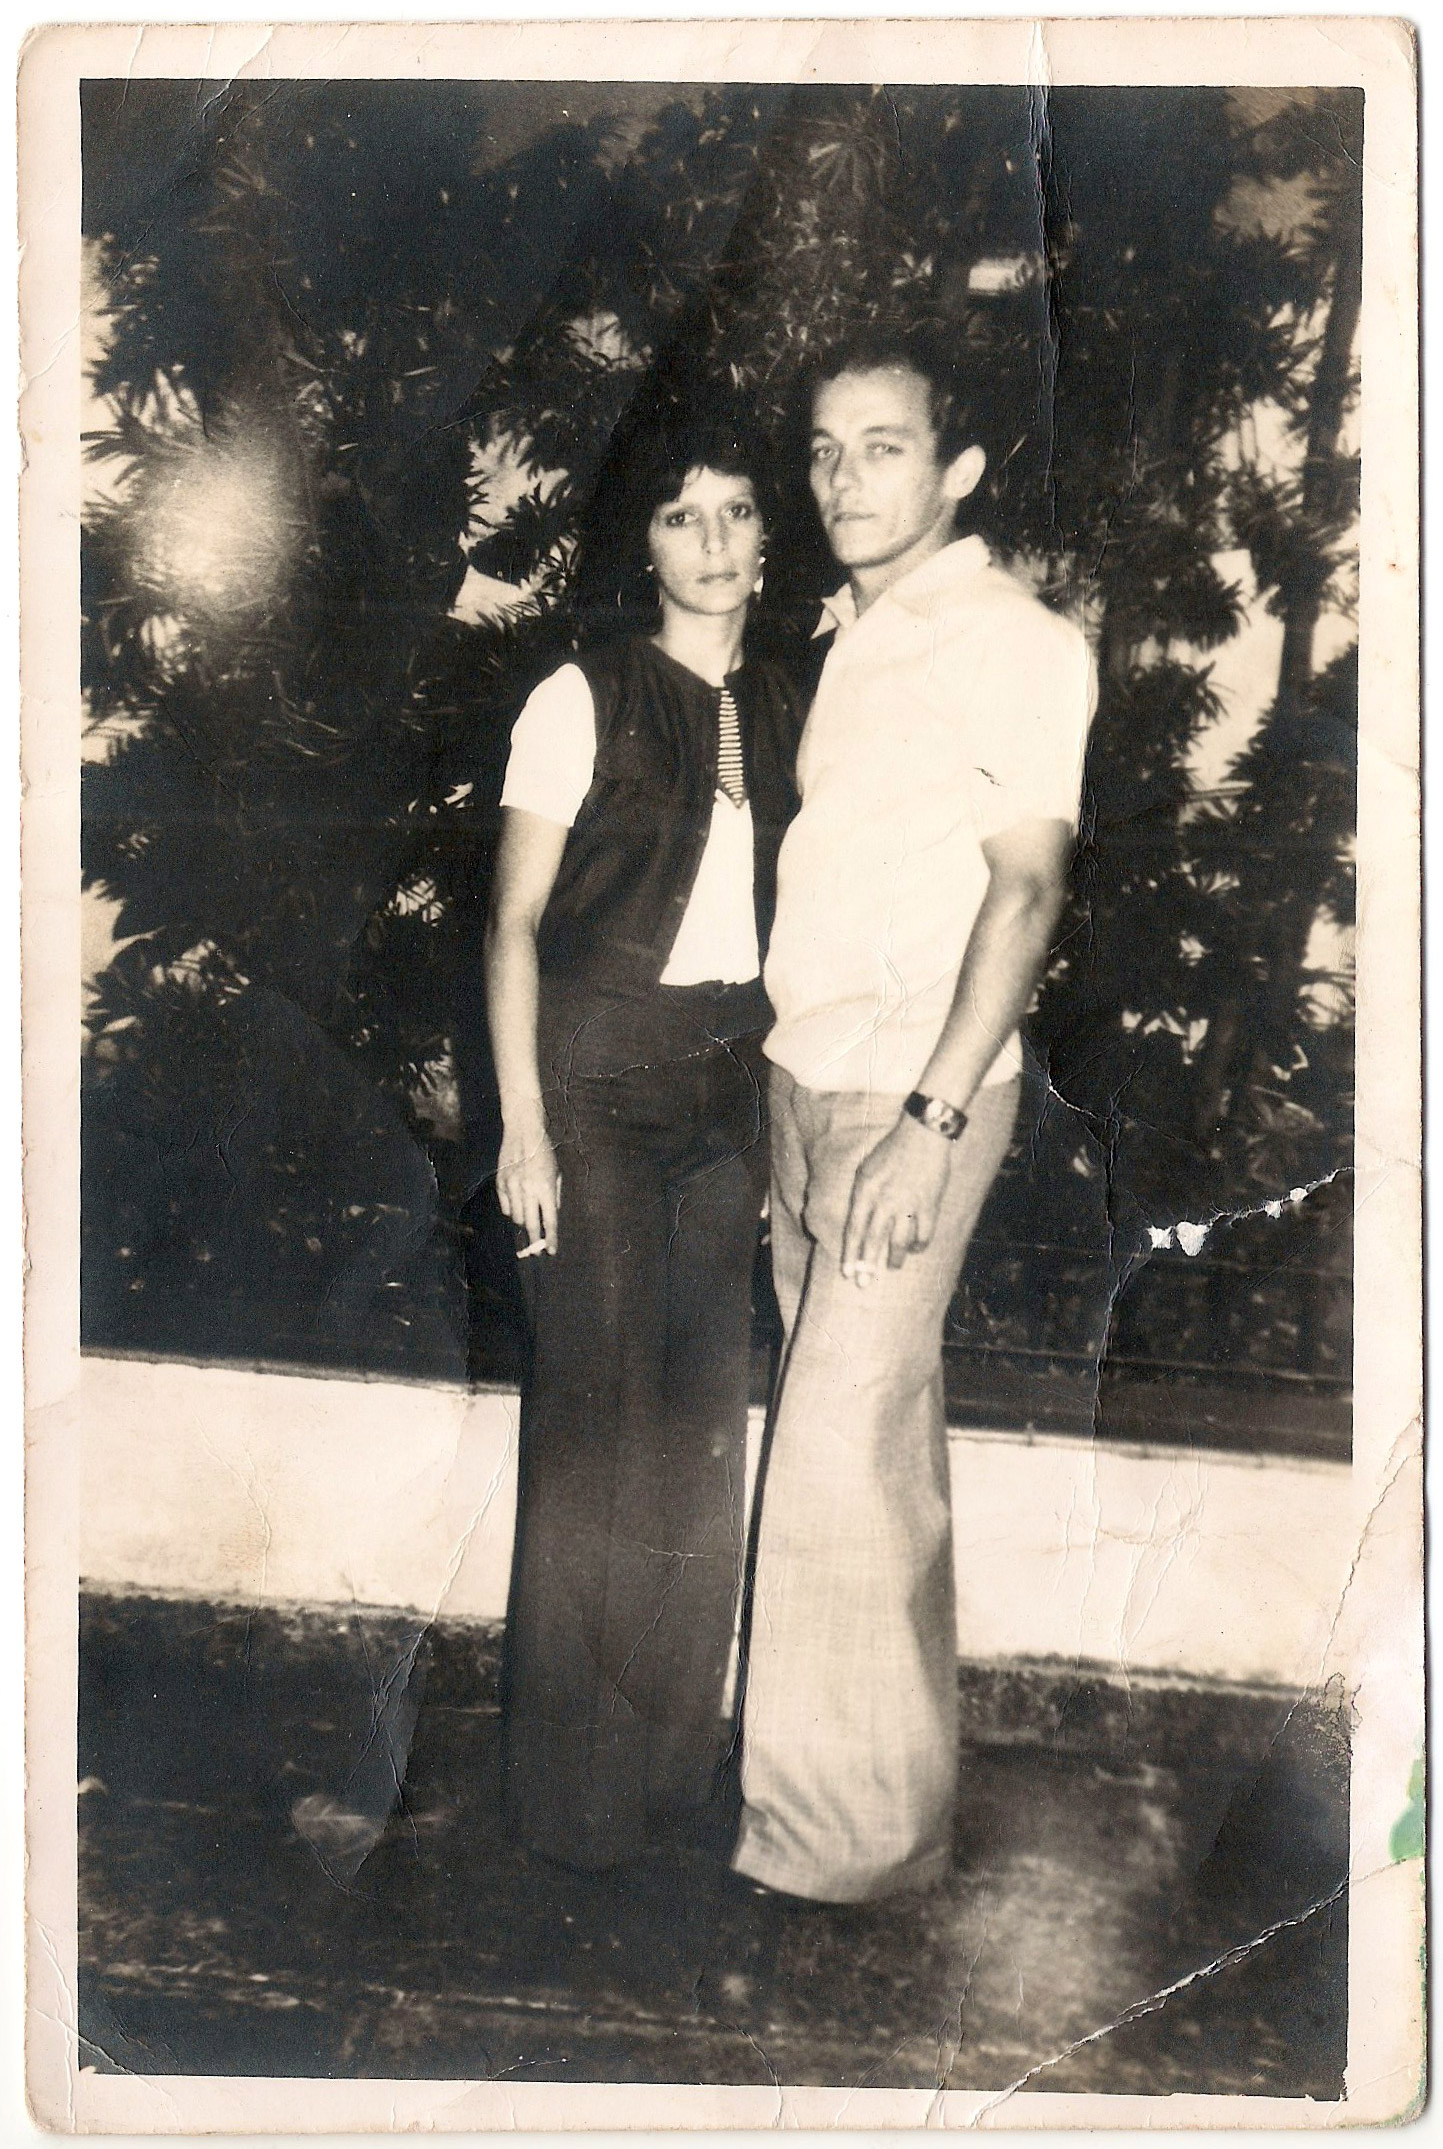 Juanito with his wife Barbara in Cuba; they had met when she was 13 years old. Barbara, concerned for her brother Hector who had left to the U.S., plead for Juanito to go and look after him. She expected they would be reunited shortly.